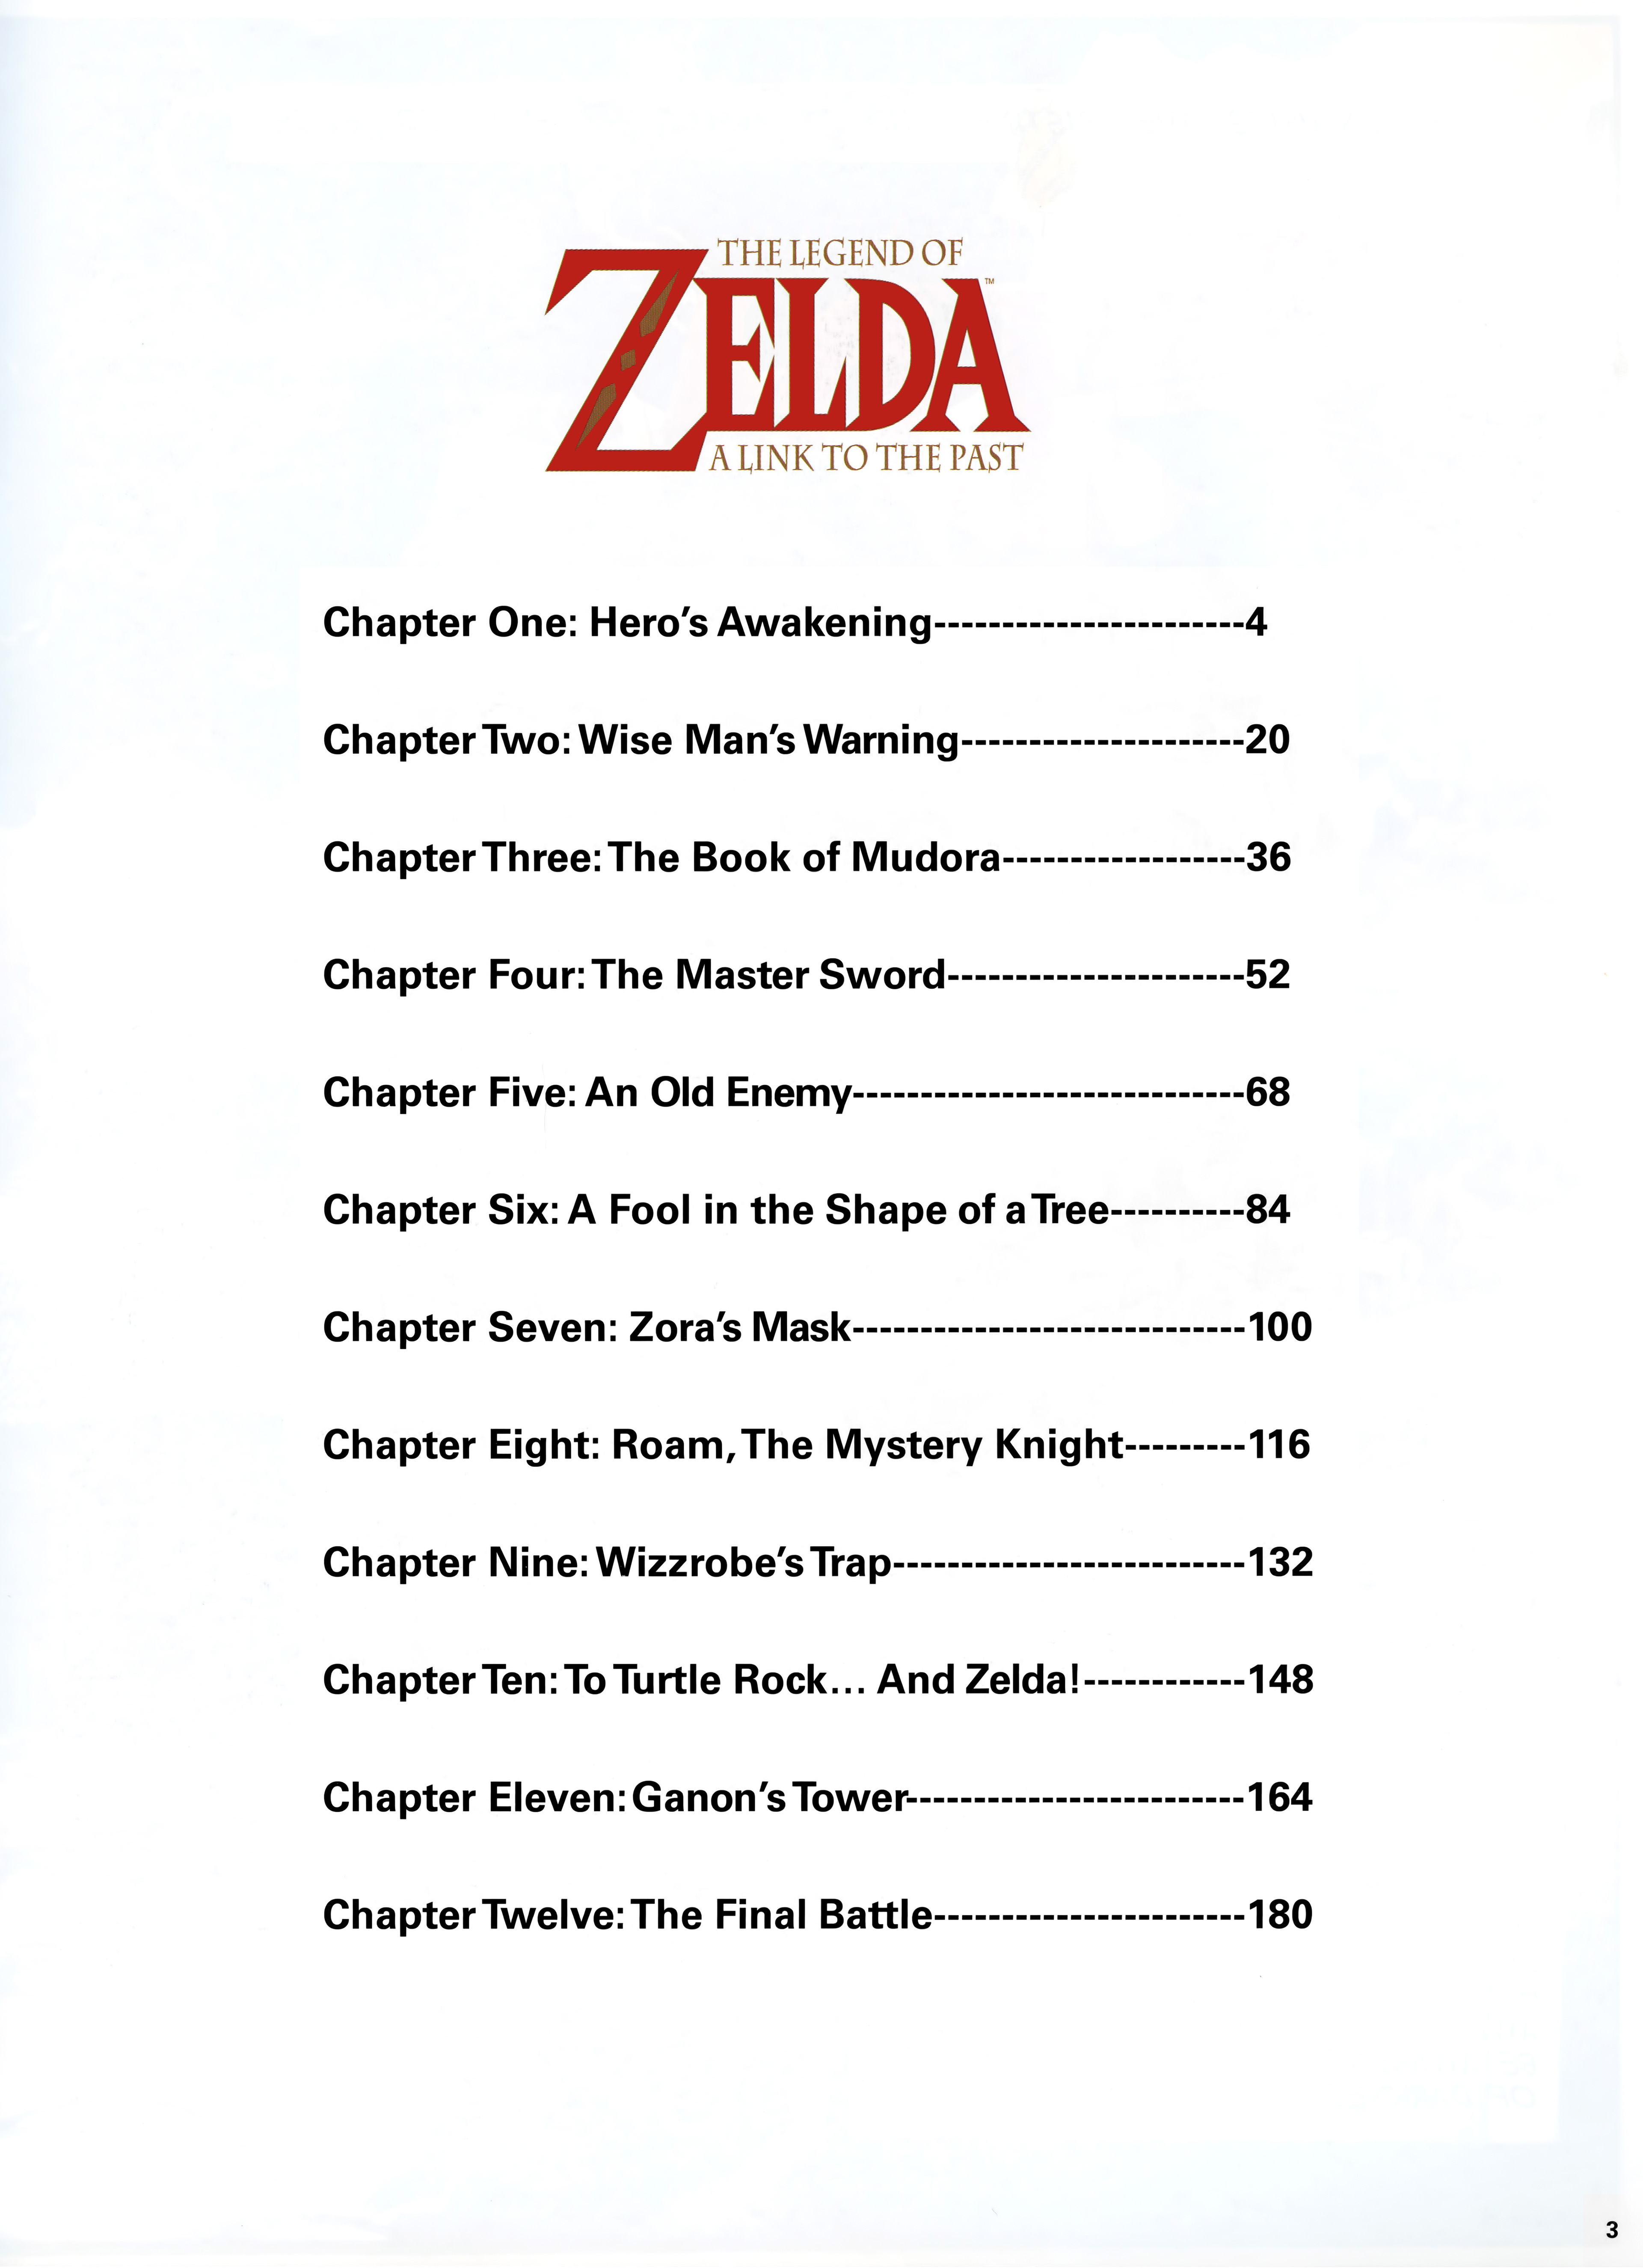 The Legend of Zelda: A Link to the Past (2015): Chapter 1 - Page 4